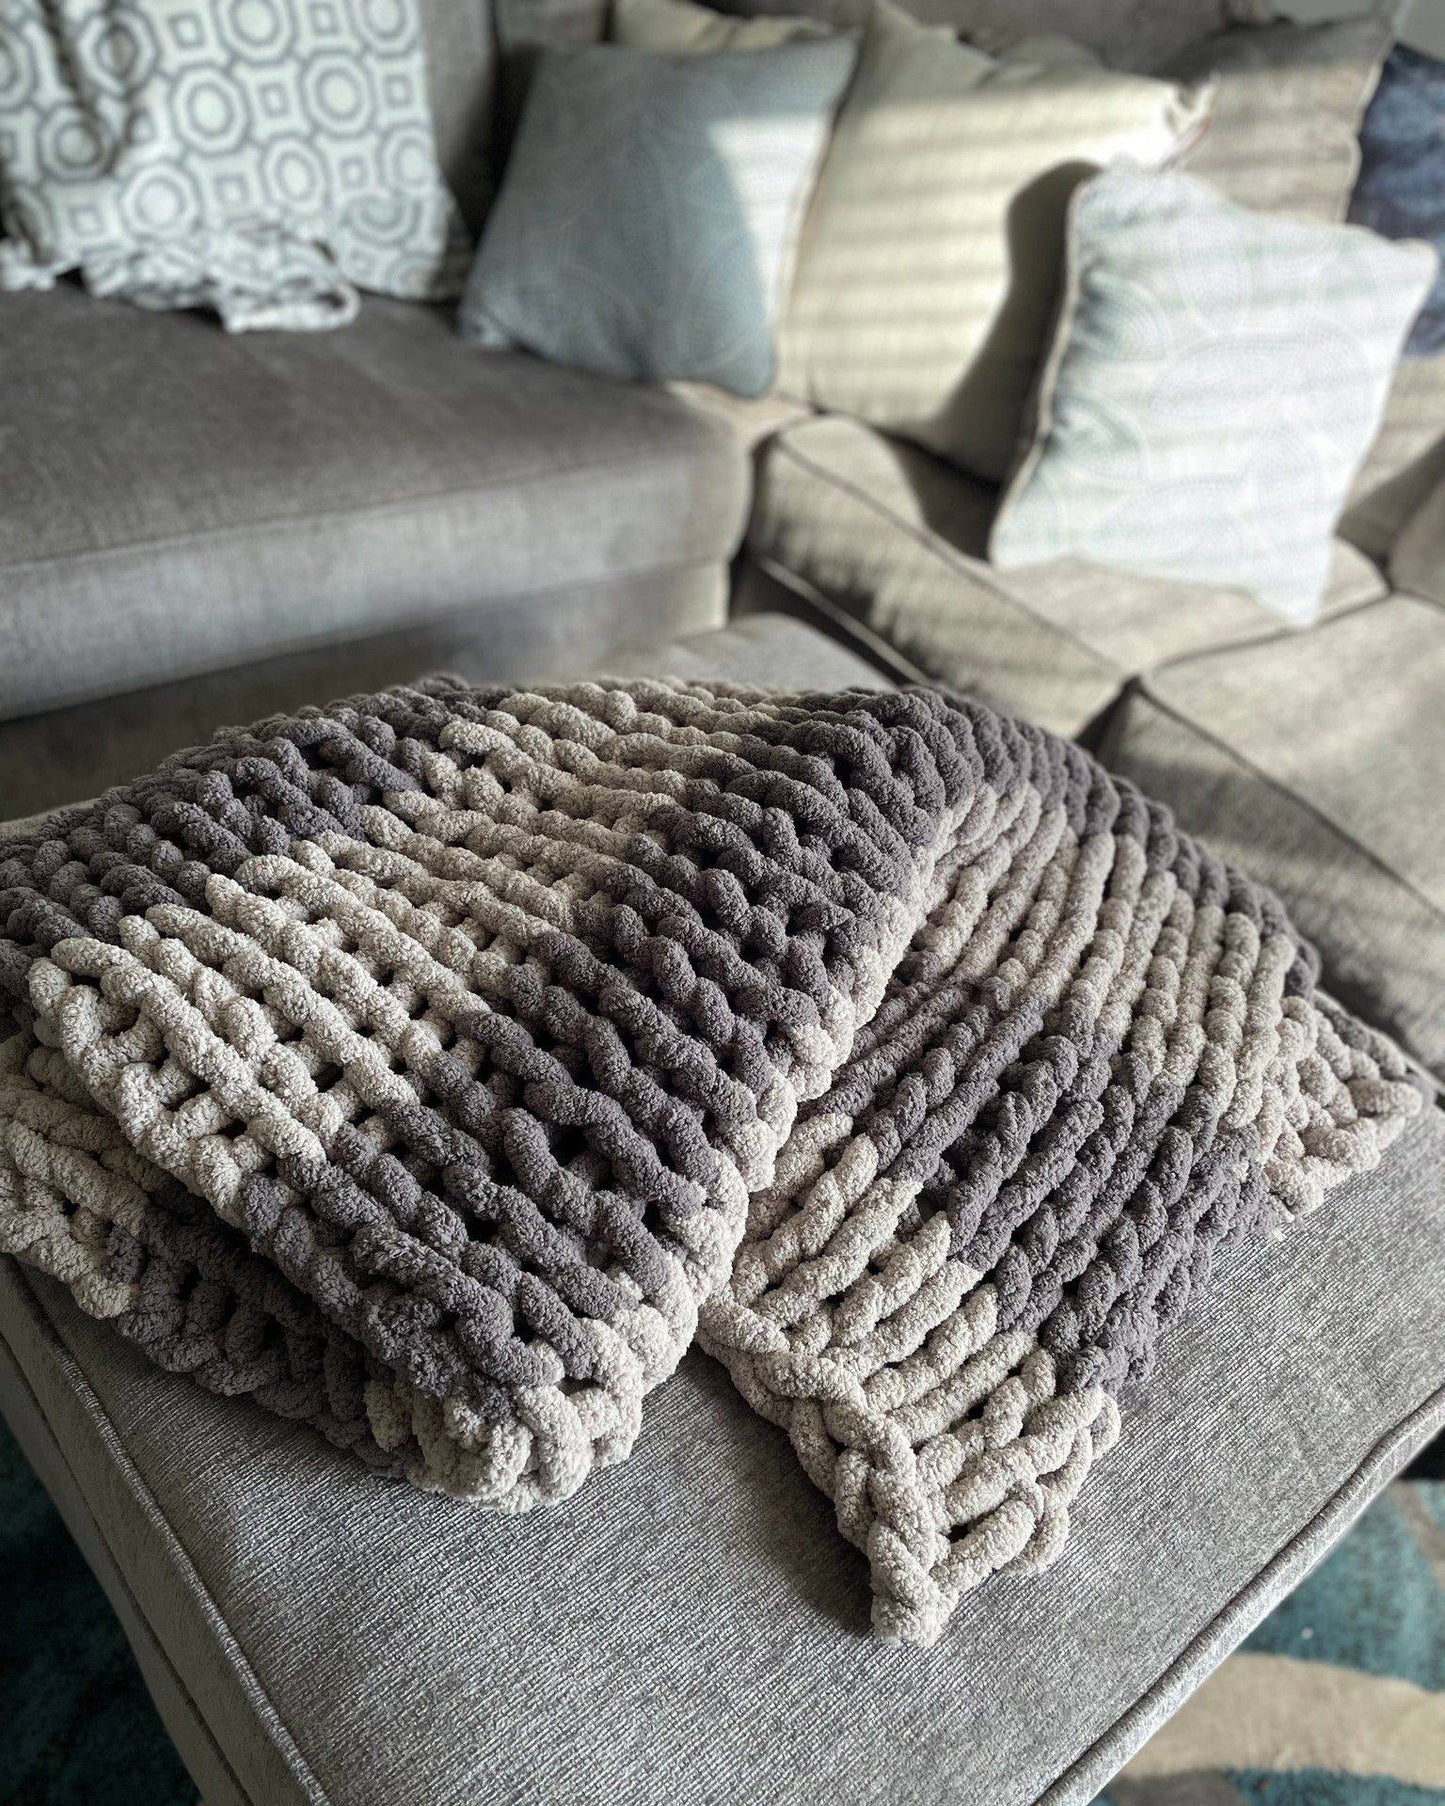 09/27/23 Cozy up by the firepit-Cozy Hand Knit Blanket Workshop 6pm